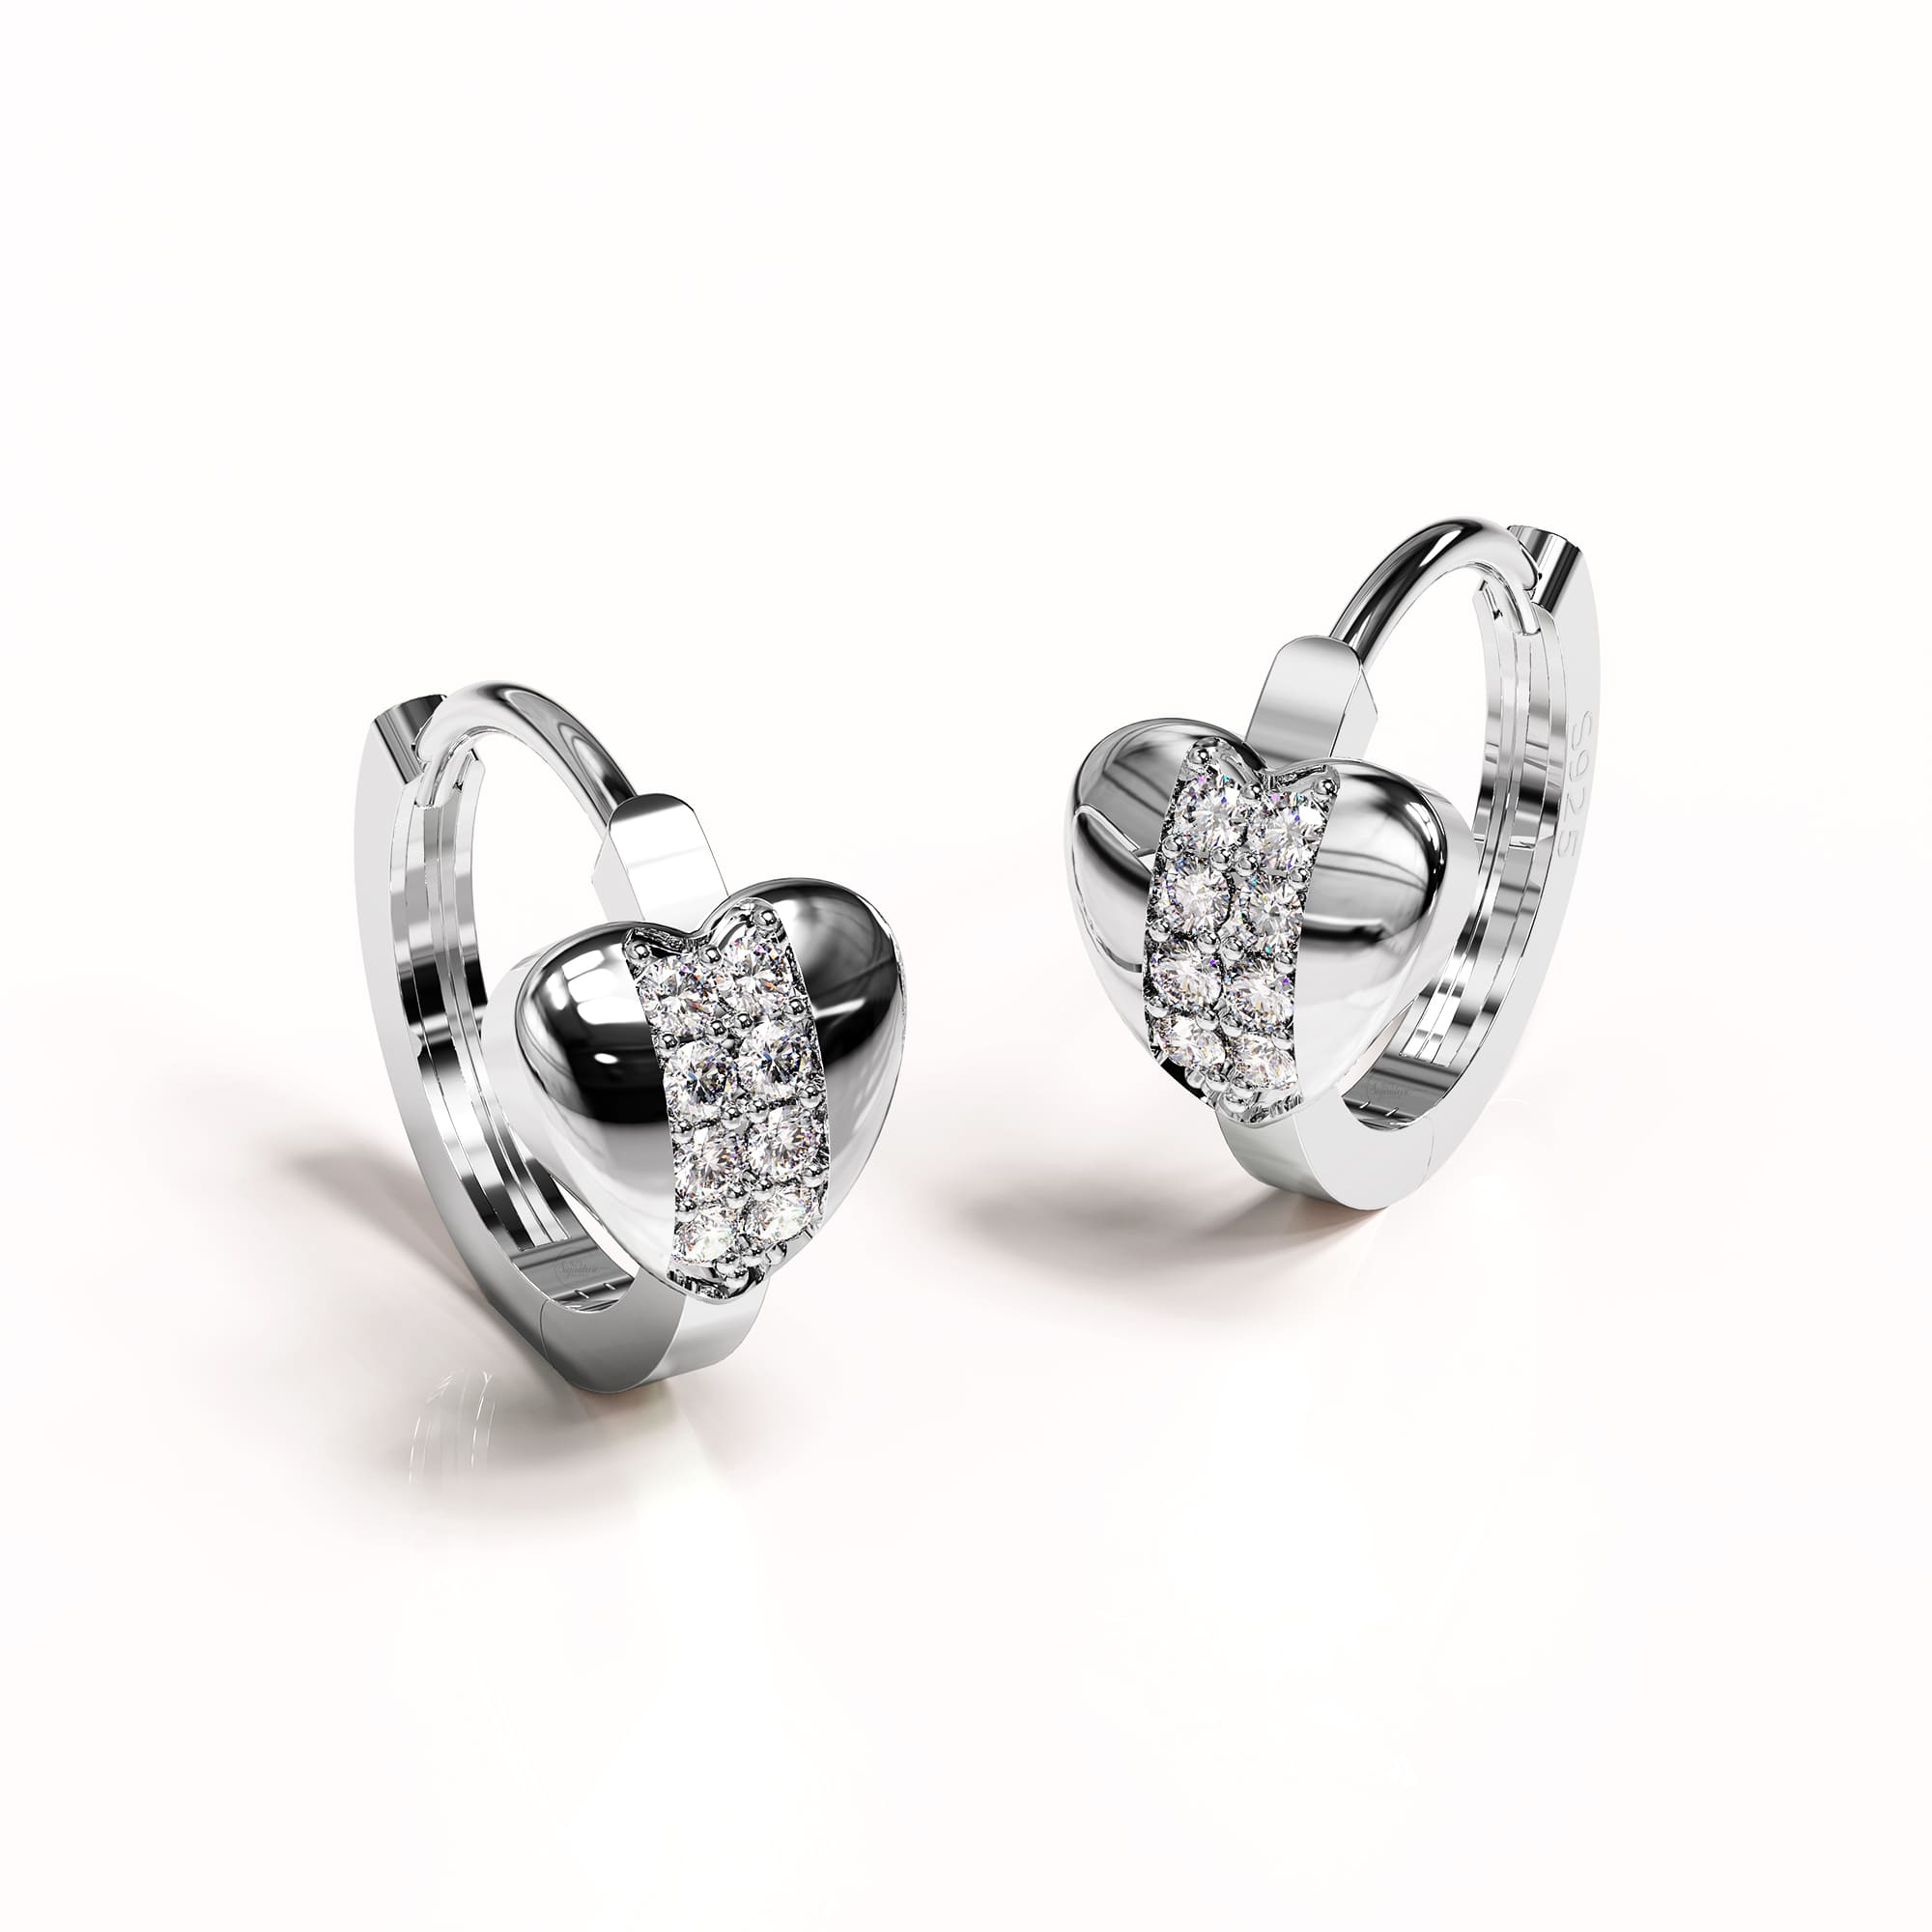 Solid 925 Sterling Silver Cubic Zirconia Middle Paved Heart Shaped Hoop Earrings